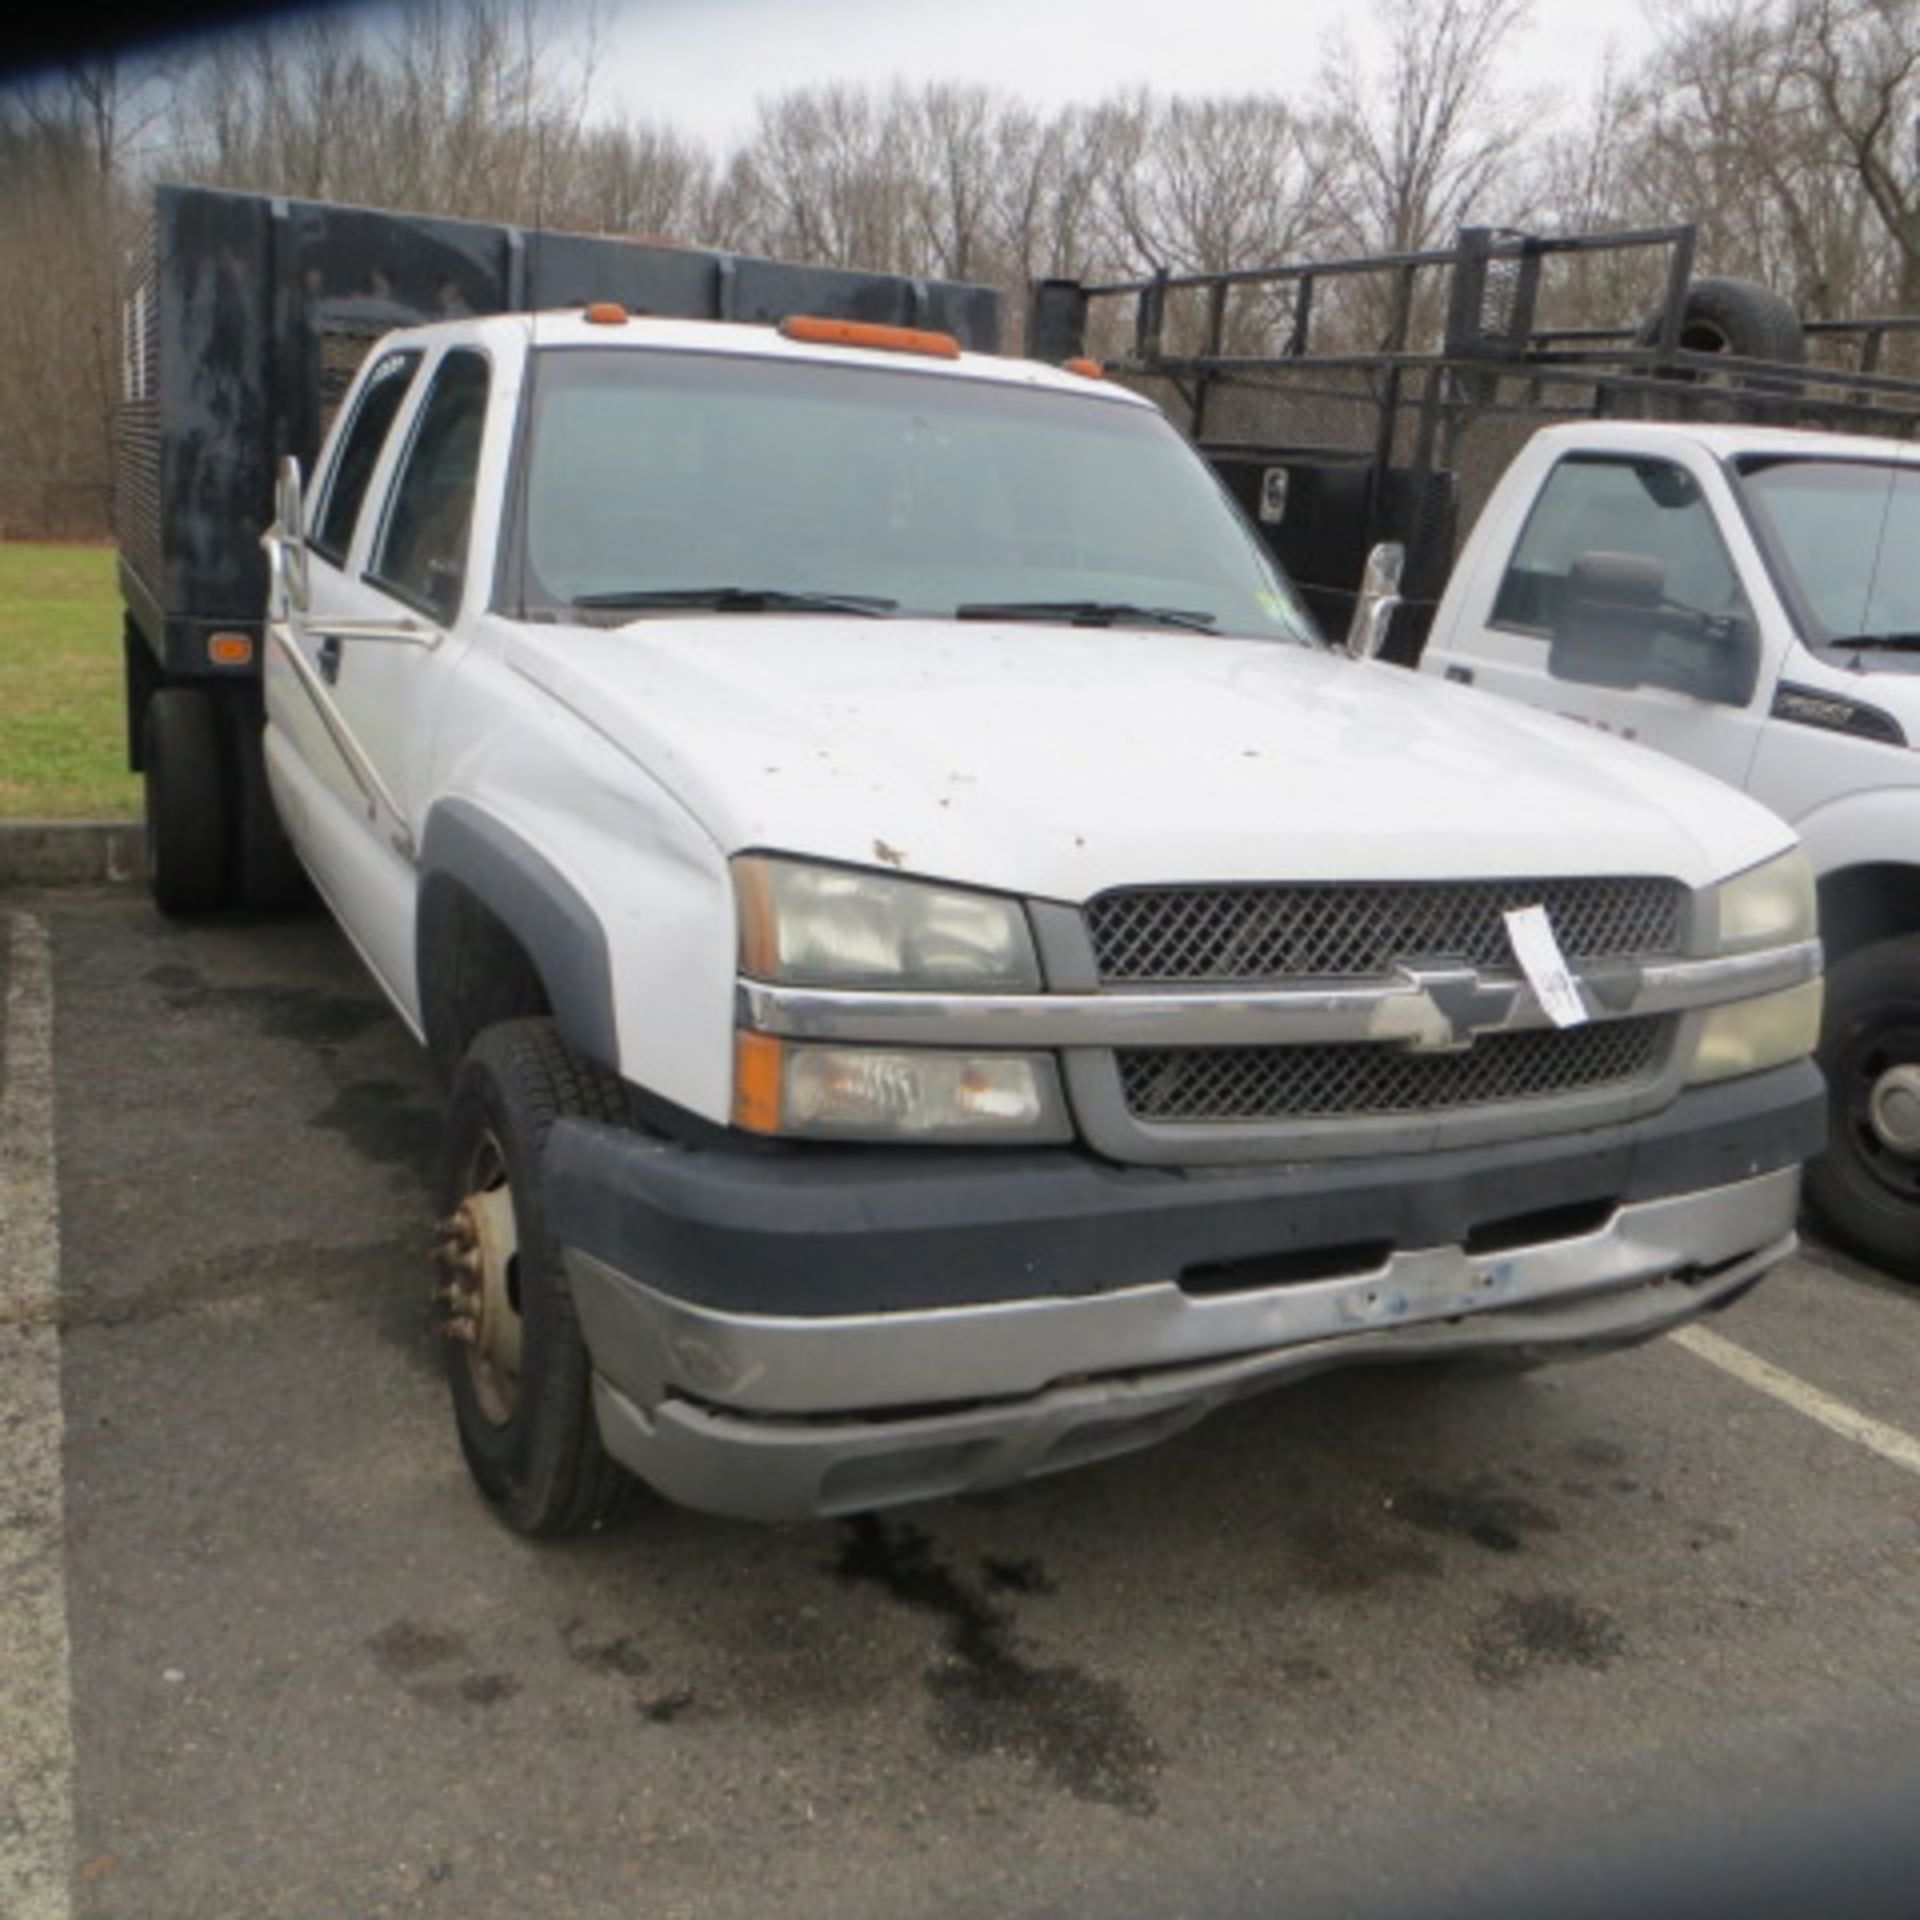 2003 CHEVY 3500 DUALLY CREW CAB STEEL STAKEBODY W/ DIAMOND PLATE SIDES… - Image 2 of 4